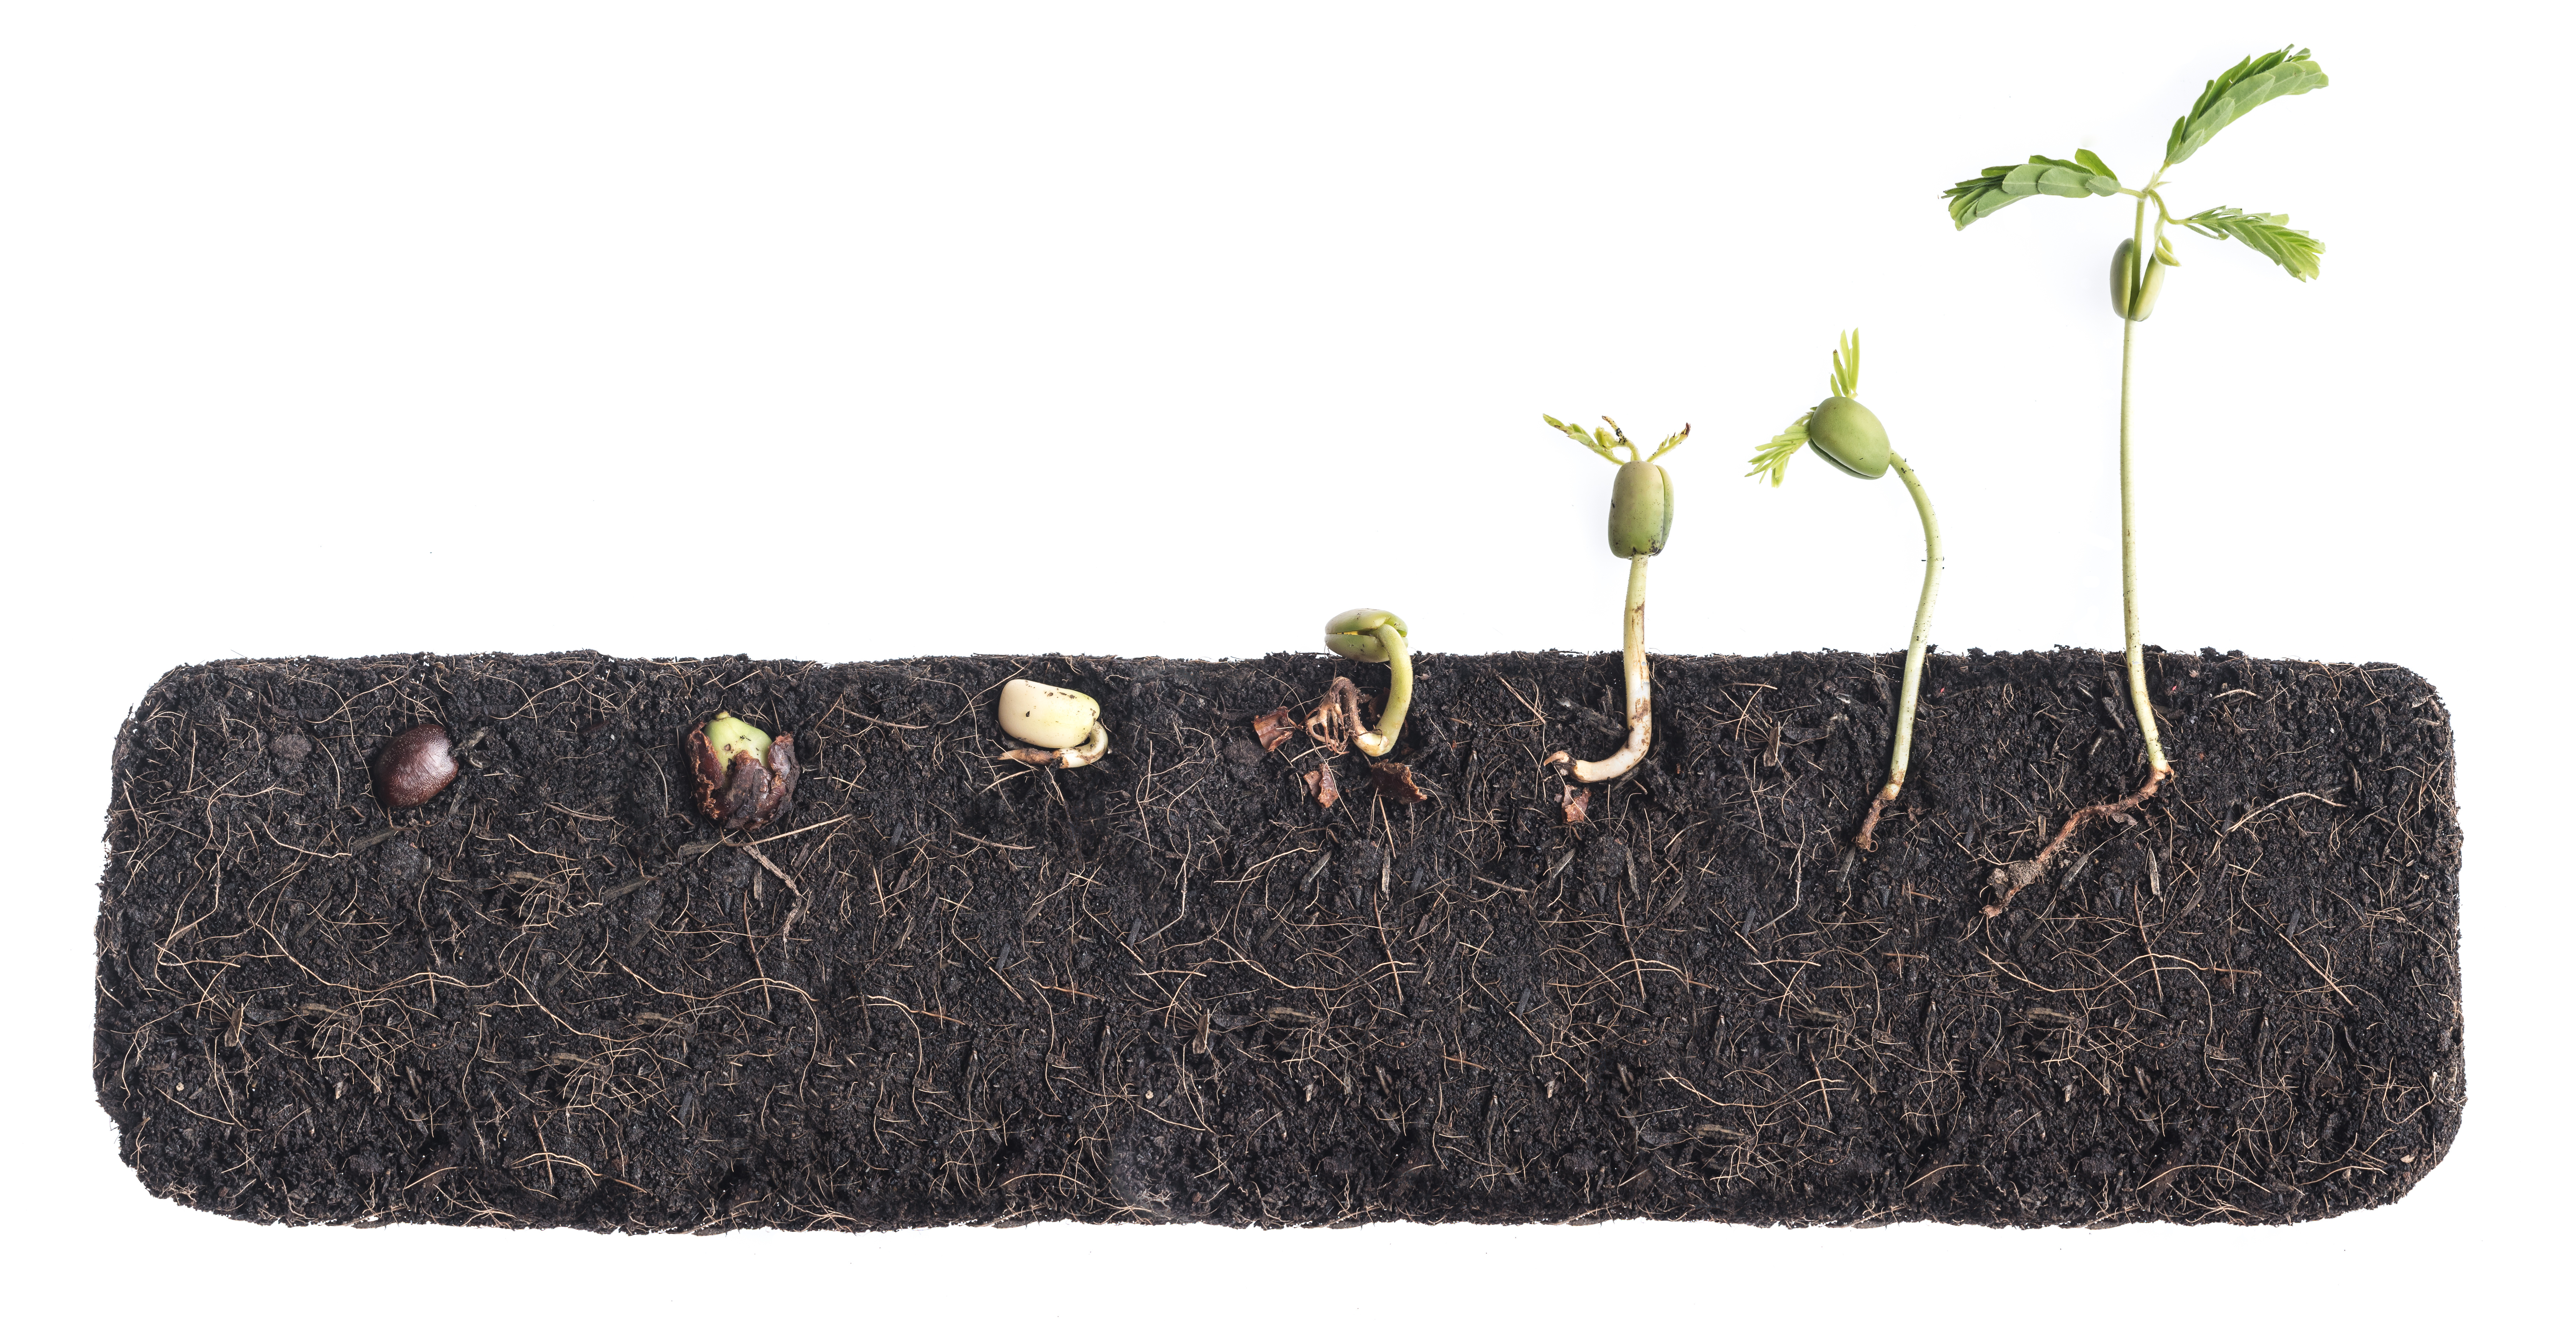 The stages of seed development in soil